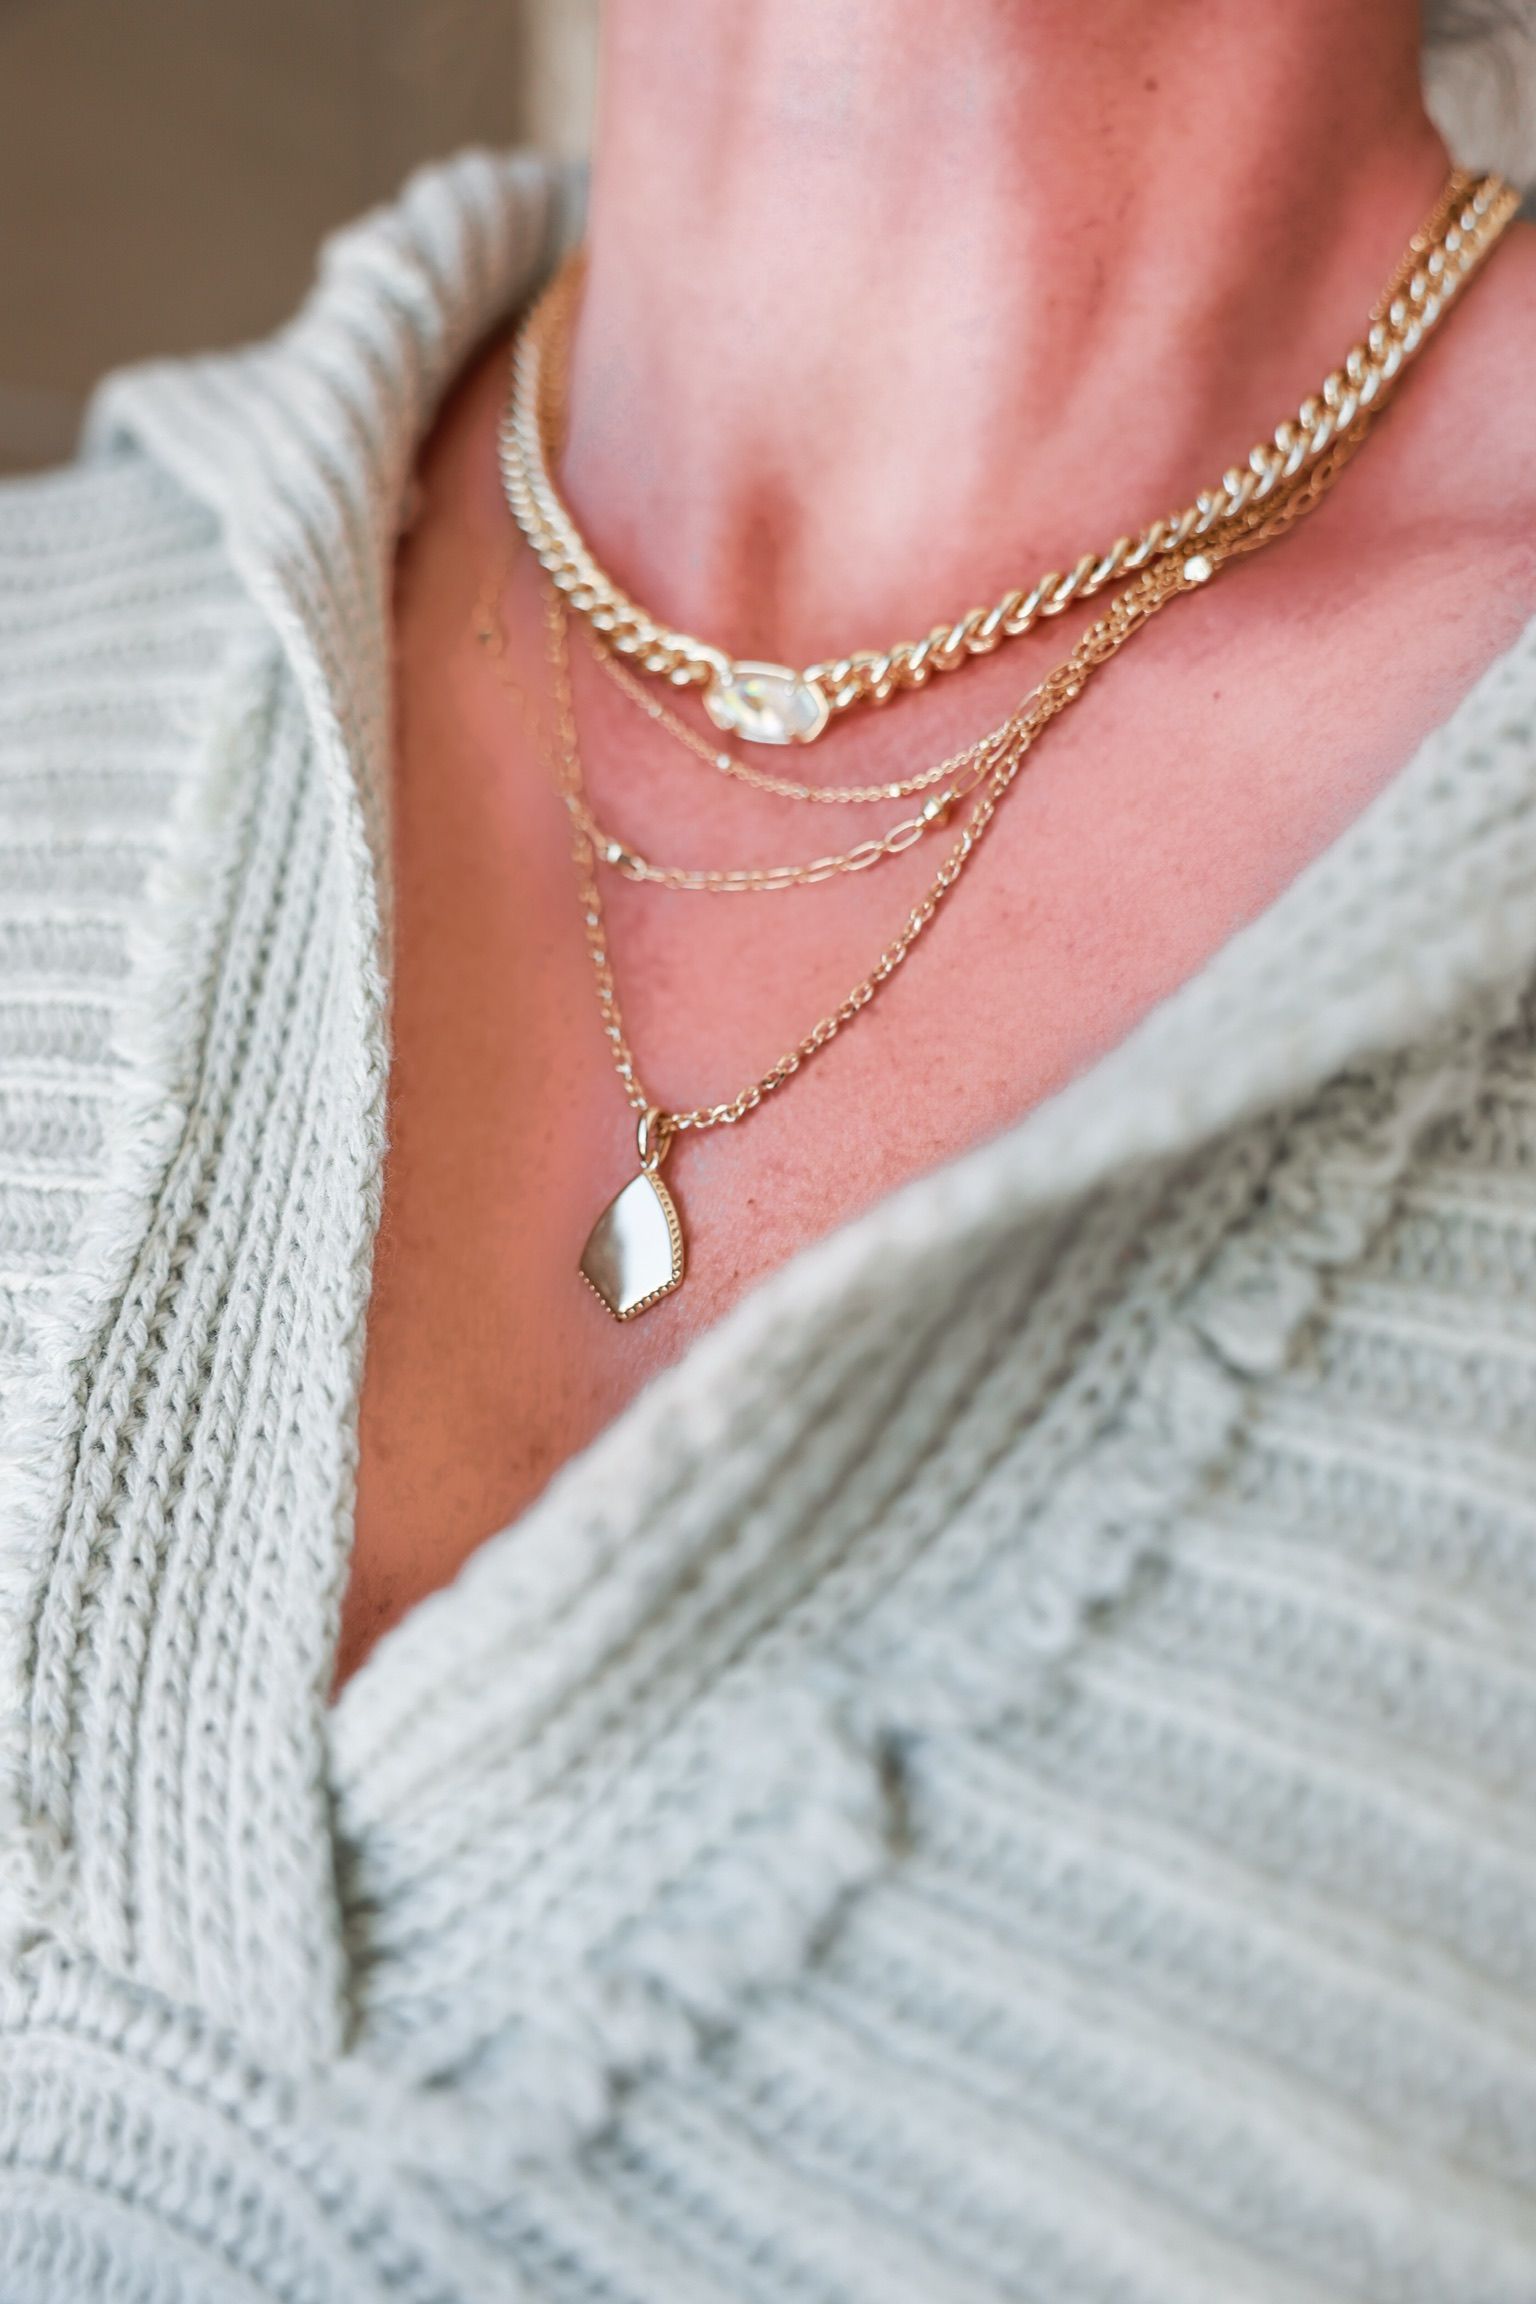 Life hacks for women, happy hacks, everyday hacks, hacks for a simpler life, easy hacks, style hacks, fashion hacks, cleaning hacks, beauty hacks, just add layers, kendra scott grier pendant necklace, kendra scott camry layerd pendant necklace, free people marlie pulloever sweater, erin busbee fashion blogger over 40, telluride co